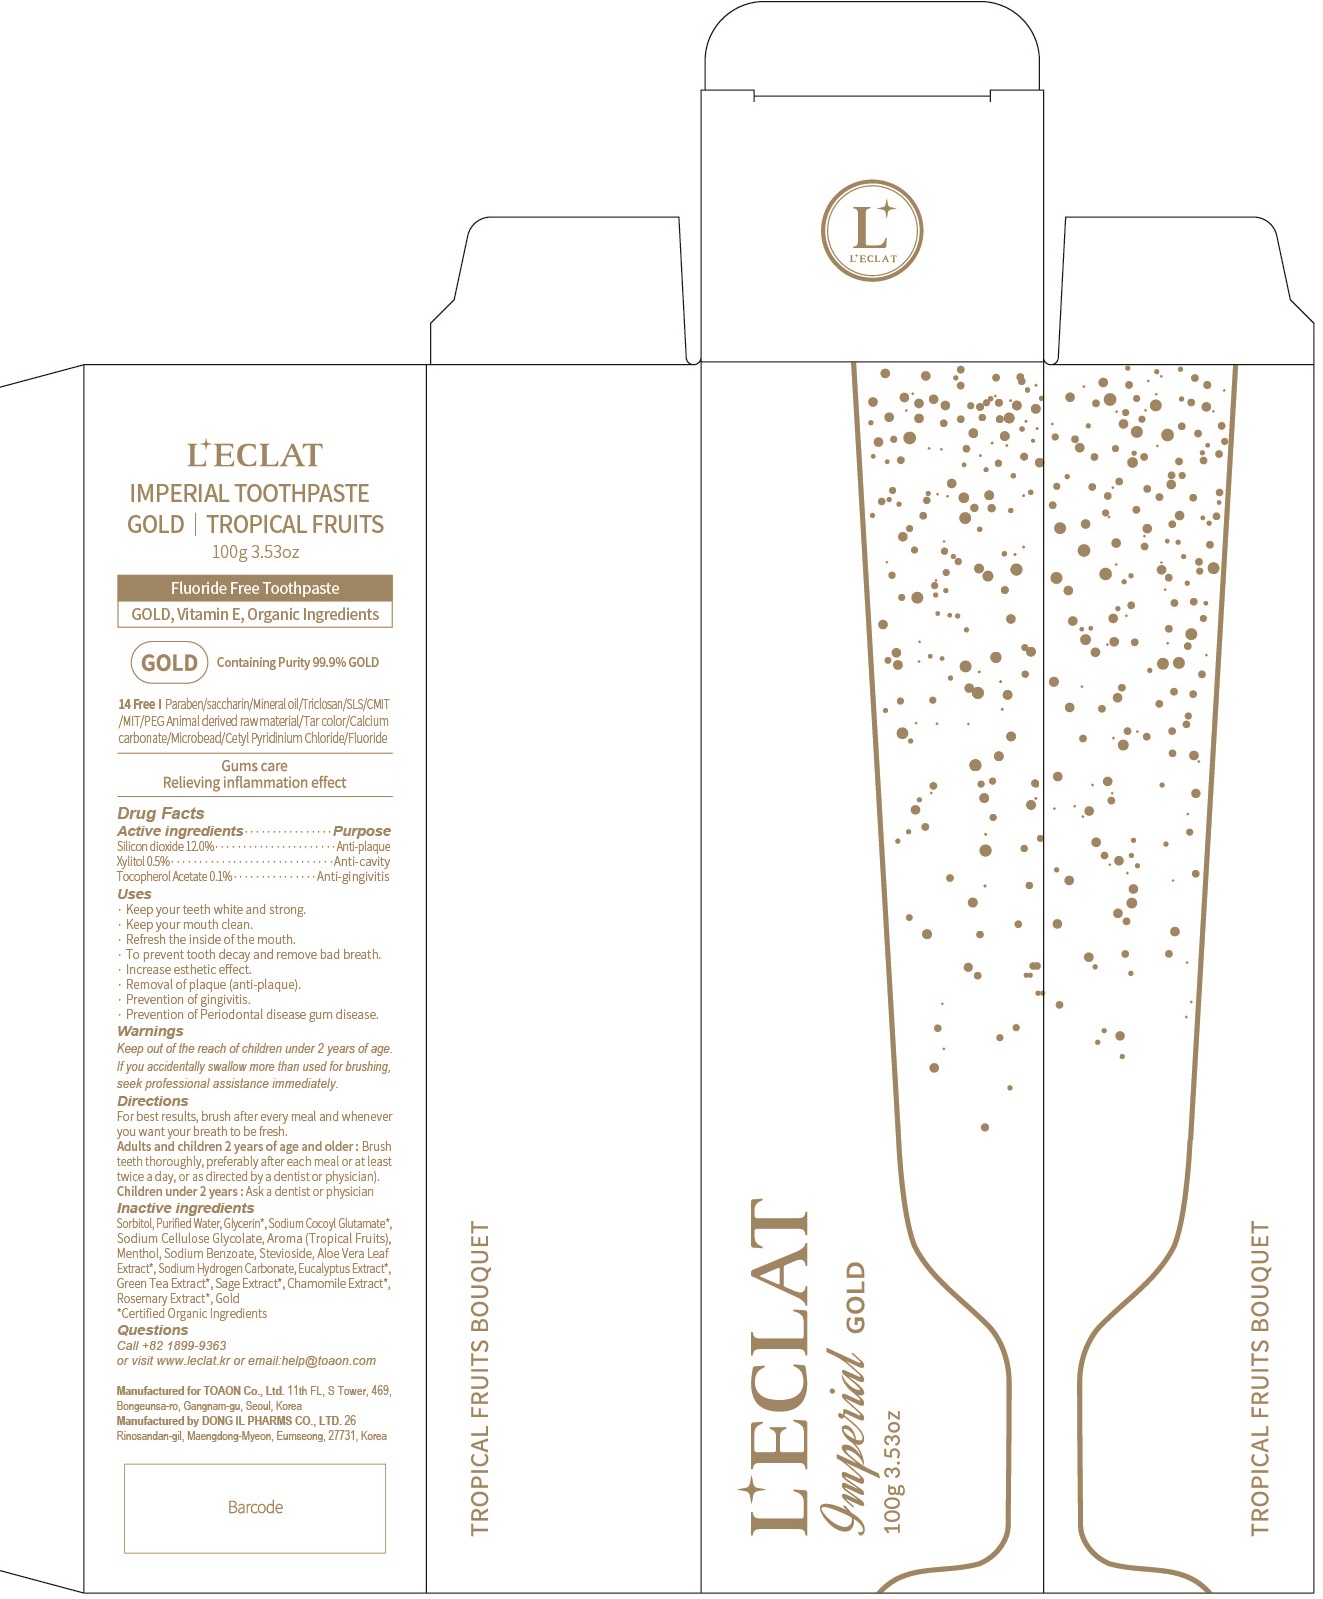 L'eclat Imperial Toothpaste | Silicon Dioxide, Xylitol, Tocopherol Acetate Paste, Dentifrice while Breastfeeding